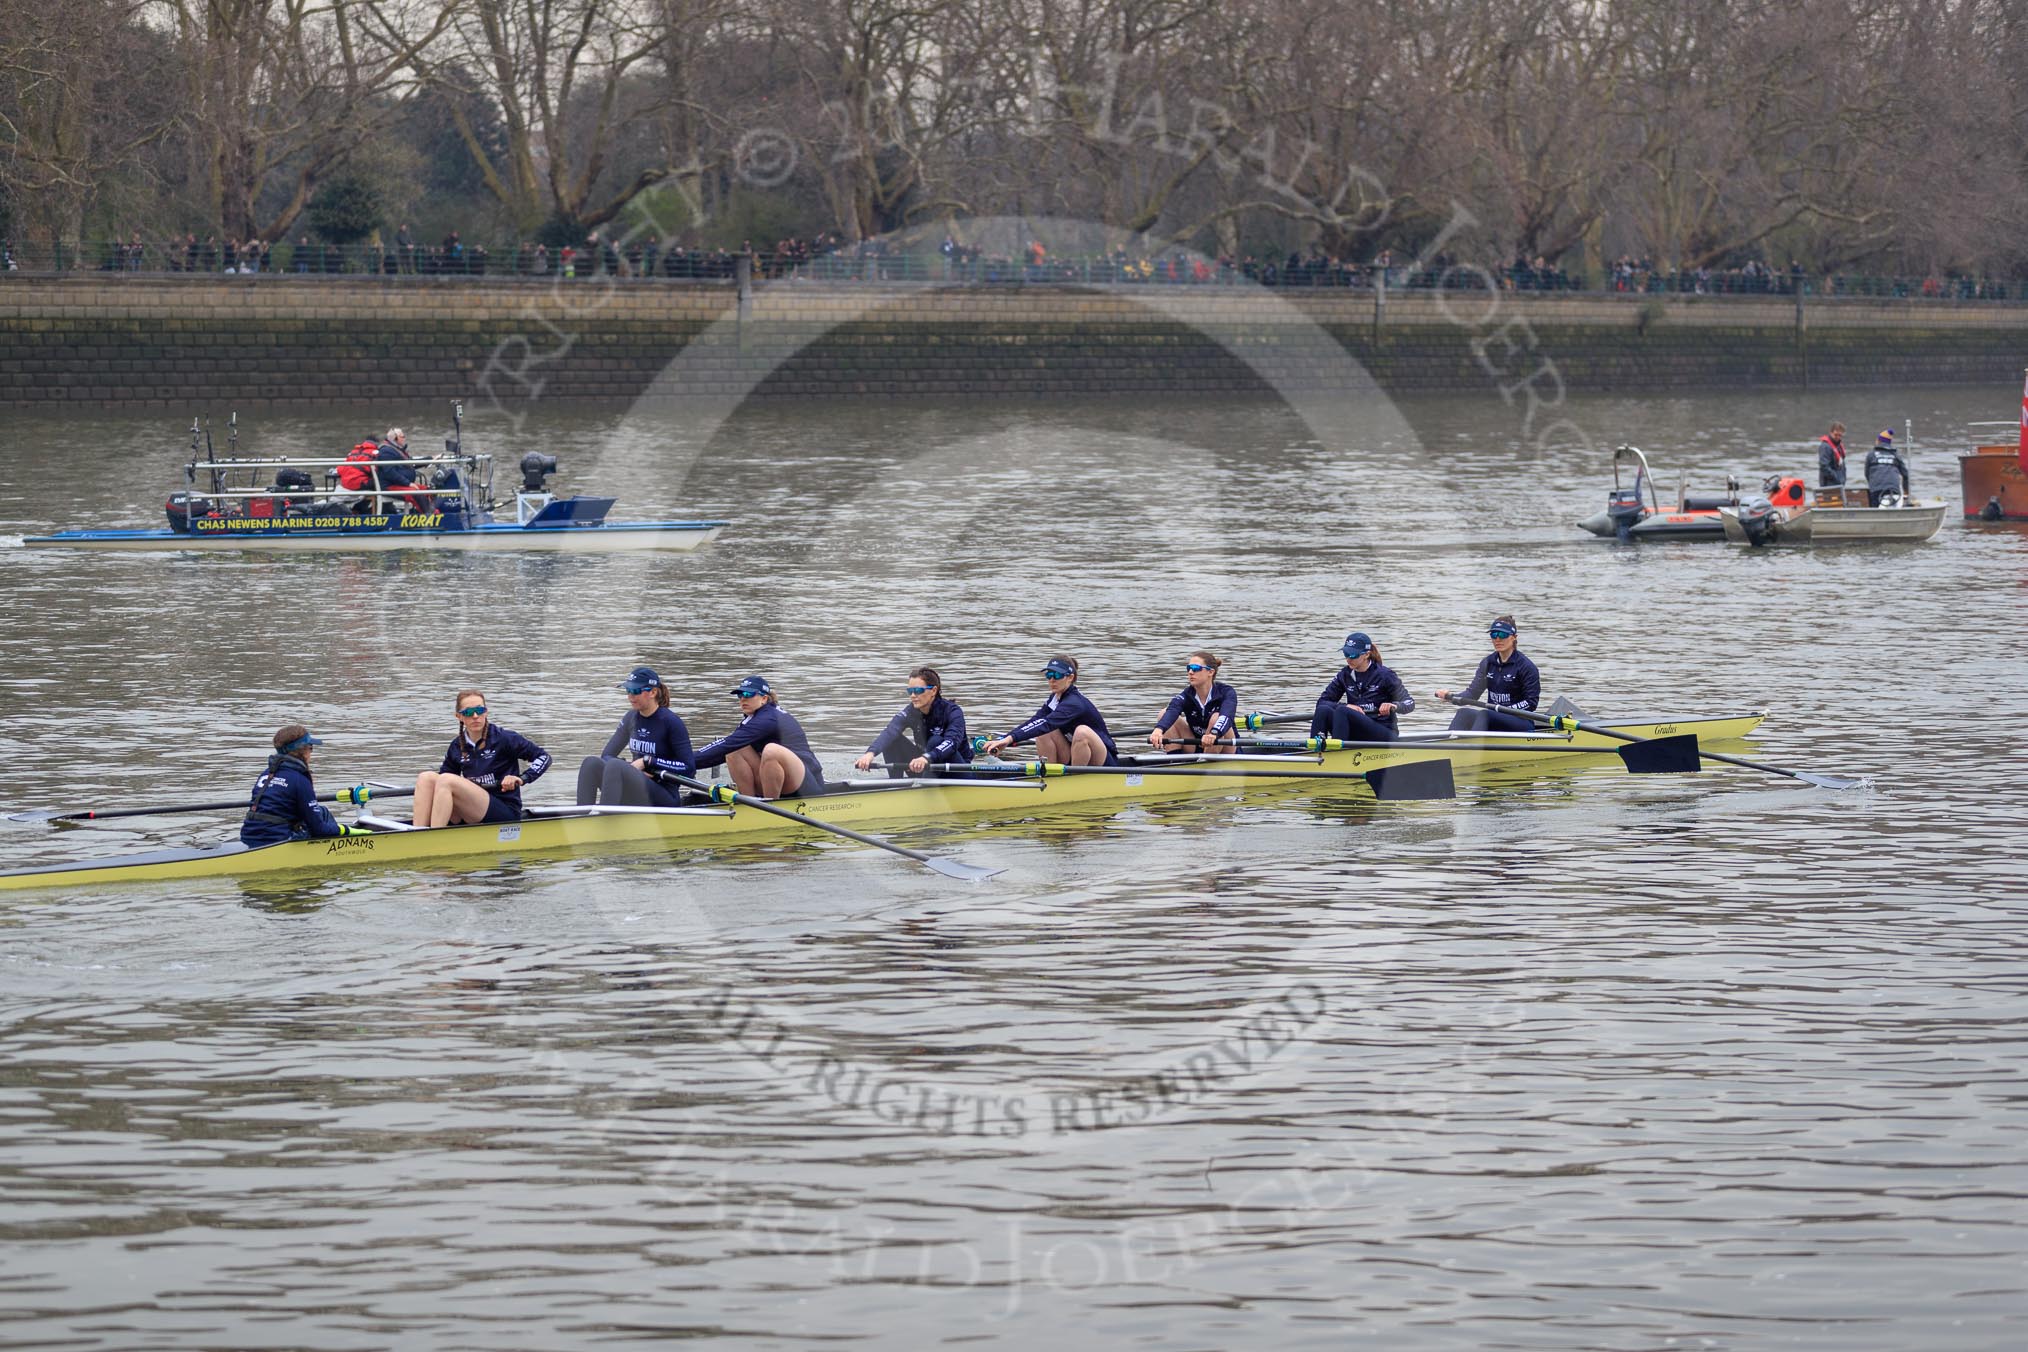 The Cancer Research UK Women's Boat Race 2018: Osiris, the Oxford reserve boat, with cox Eleanor Shearer, stroke Anna Murgatroyd, 7 Olivia Pryer, 6 Sanja Brolih, 5 Sarah Payne Riches, 4 Rachel Anderson, 3 Madeline Goss, 2 Laura Depner, bow Matlida Edwards.
River Thames between Putney Bridge and Mortlake,
London SW15,

United Kingdom,
on 24 March 2018 at 16:02, image #137